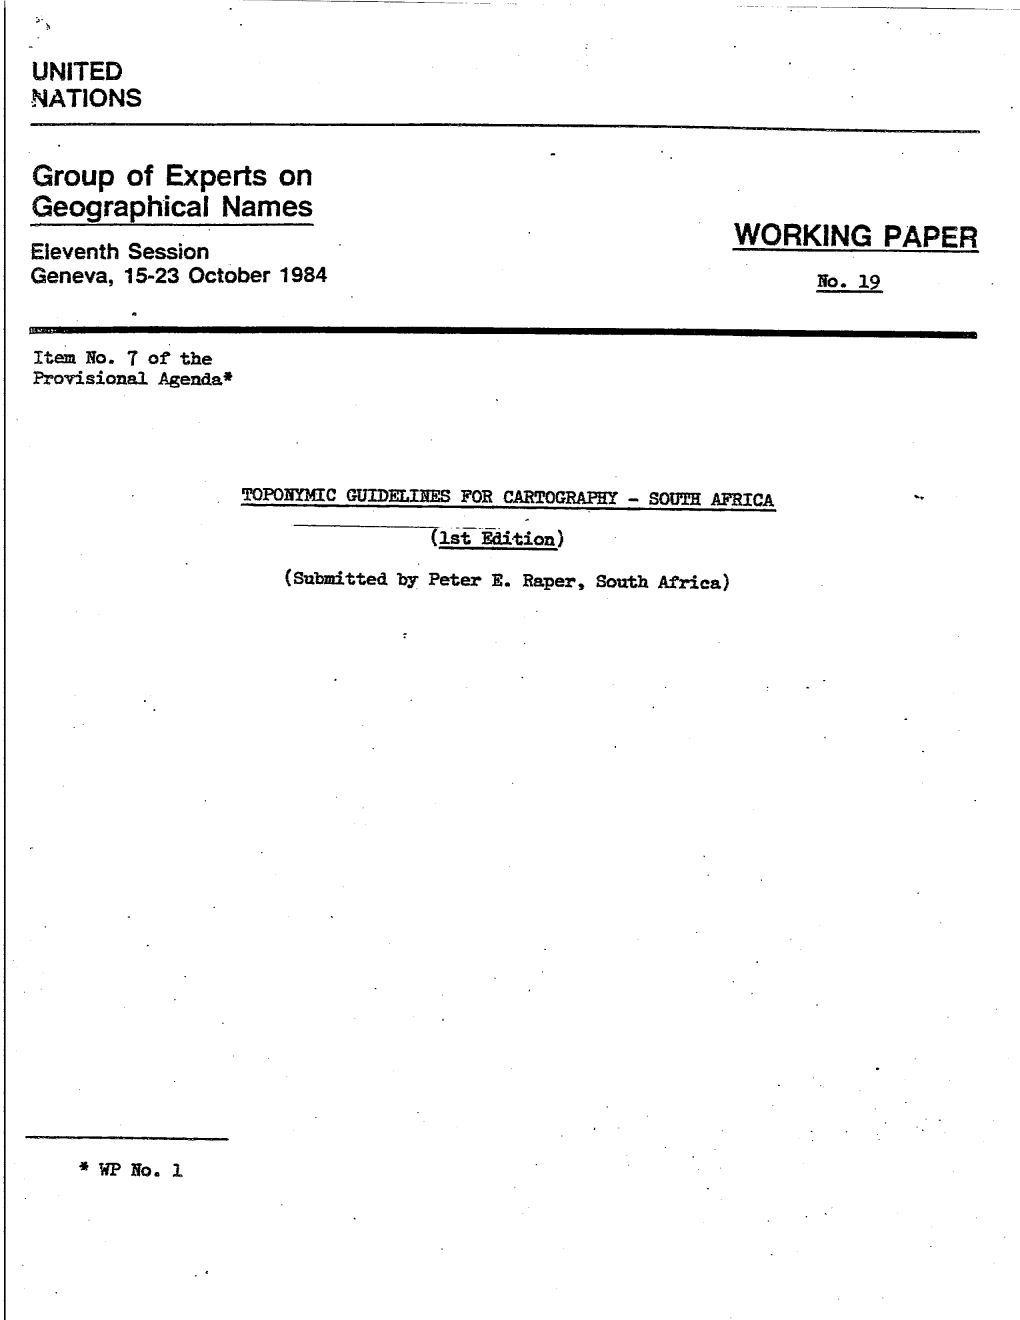 Group of Experts on Geographical Names -— WORKING PAPER Eleventh Session ~ Geneva, 15-23 October 1984 No